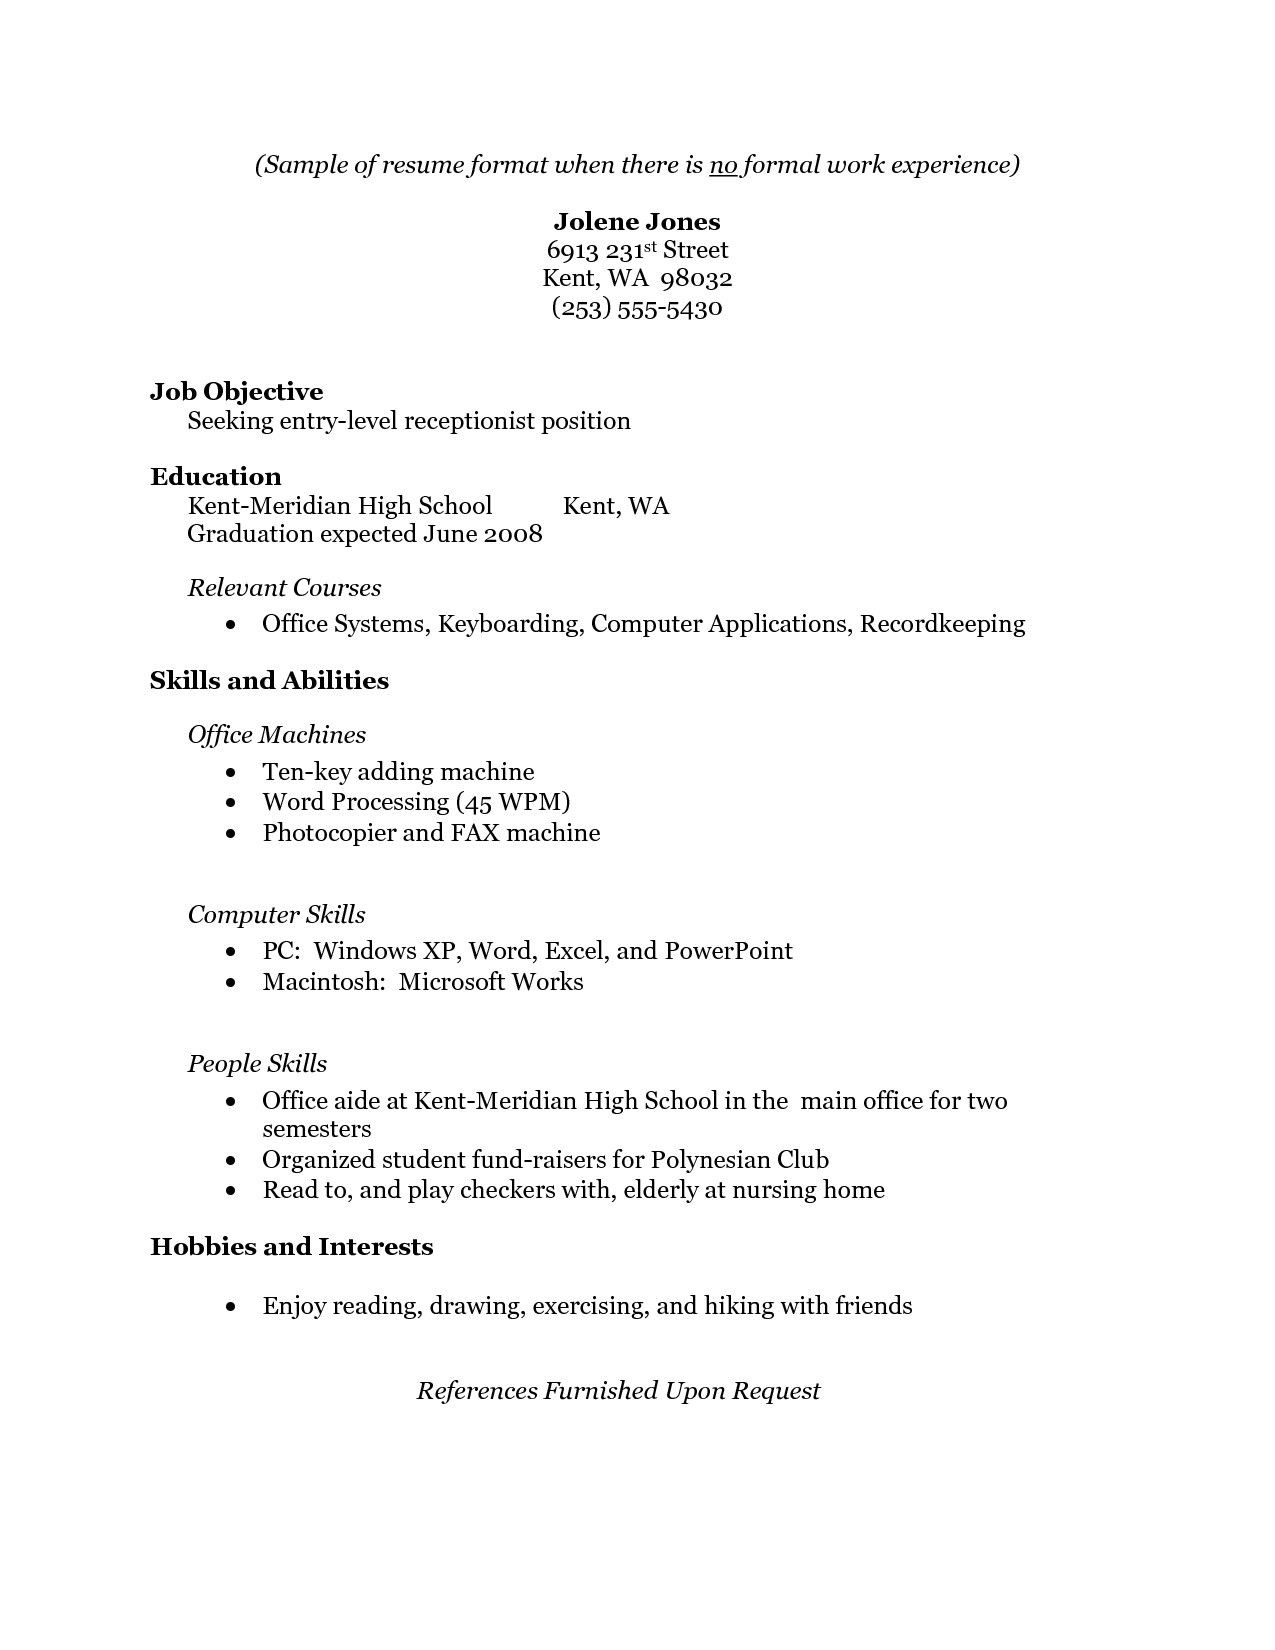 Resume Template for People with No Experience Free Resume Templates No Work Experience #experience …